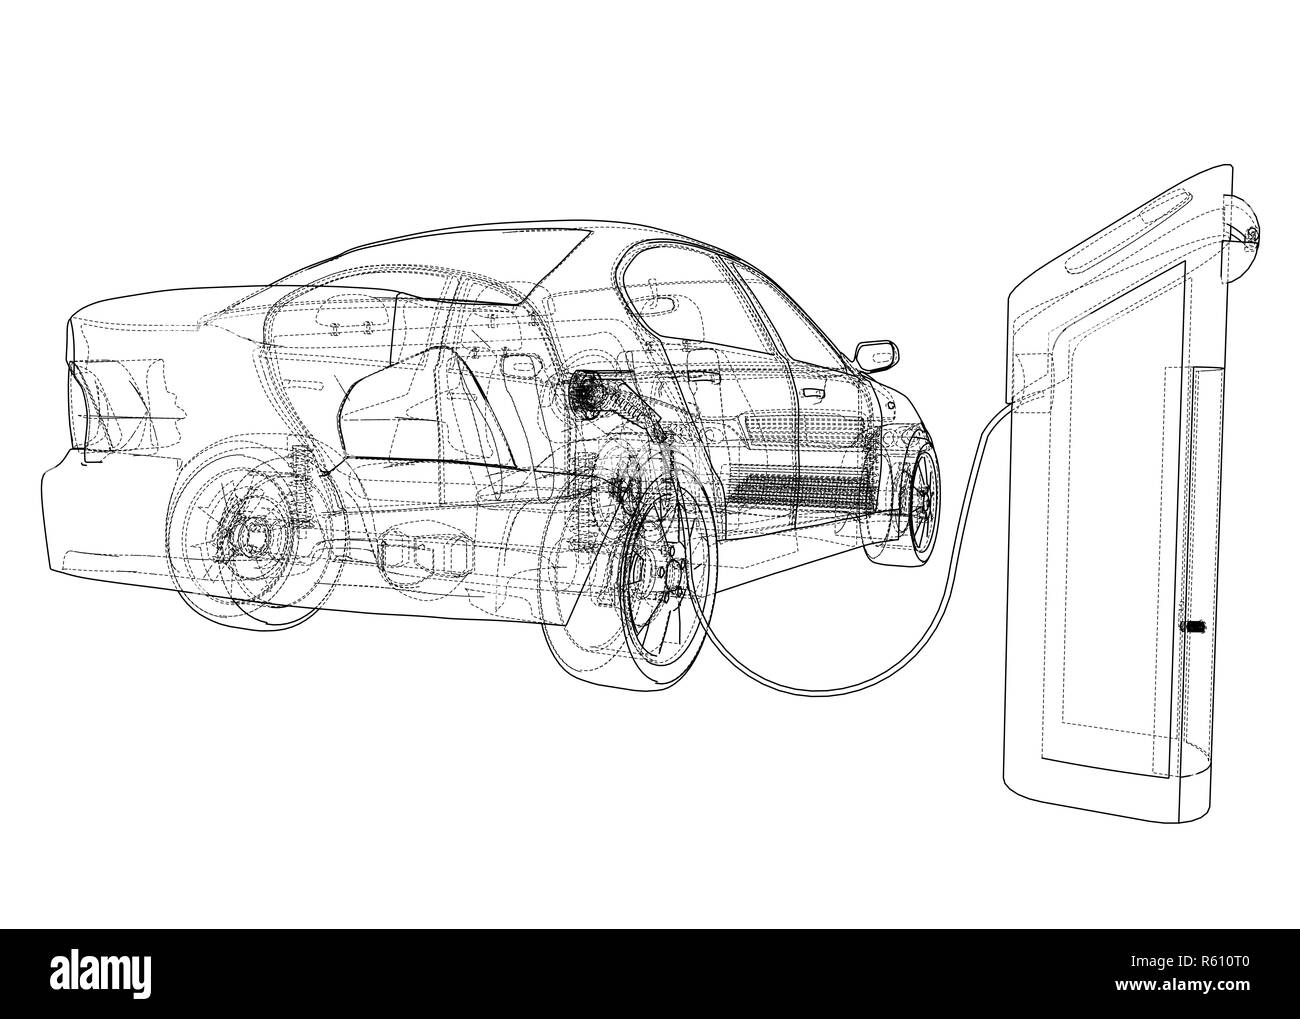 Electric Vehicle Charging Station Sketch Stock Photo